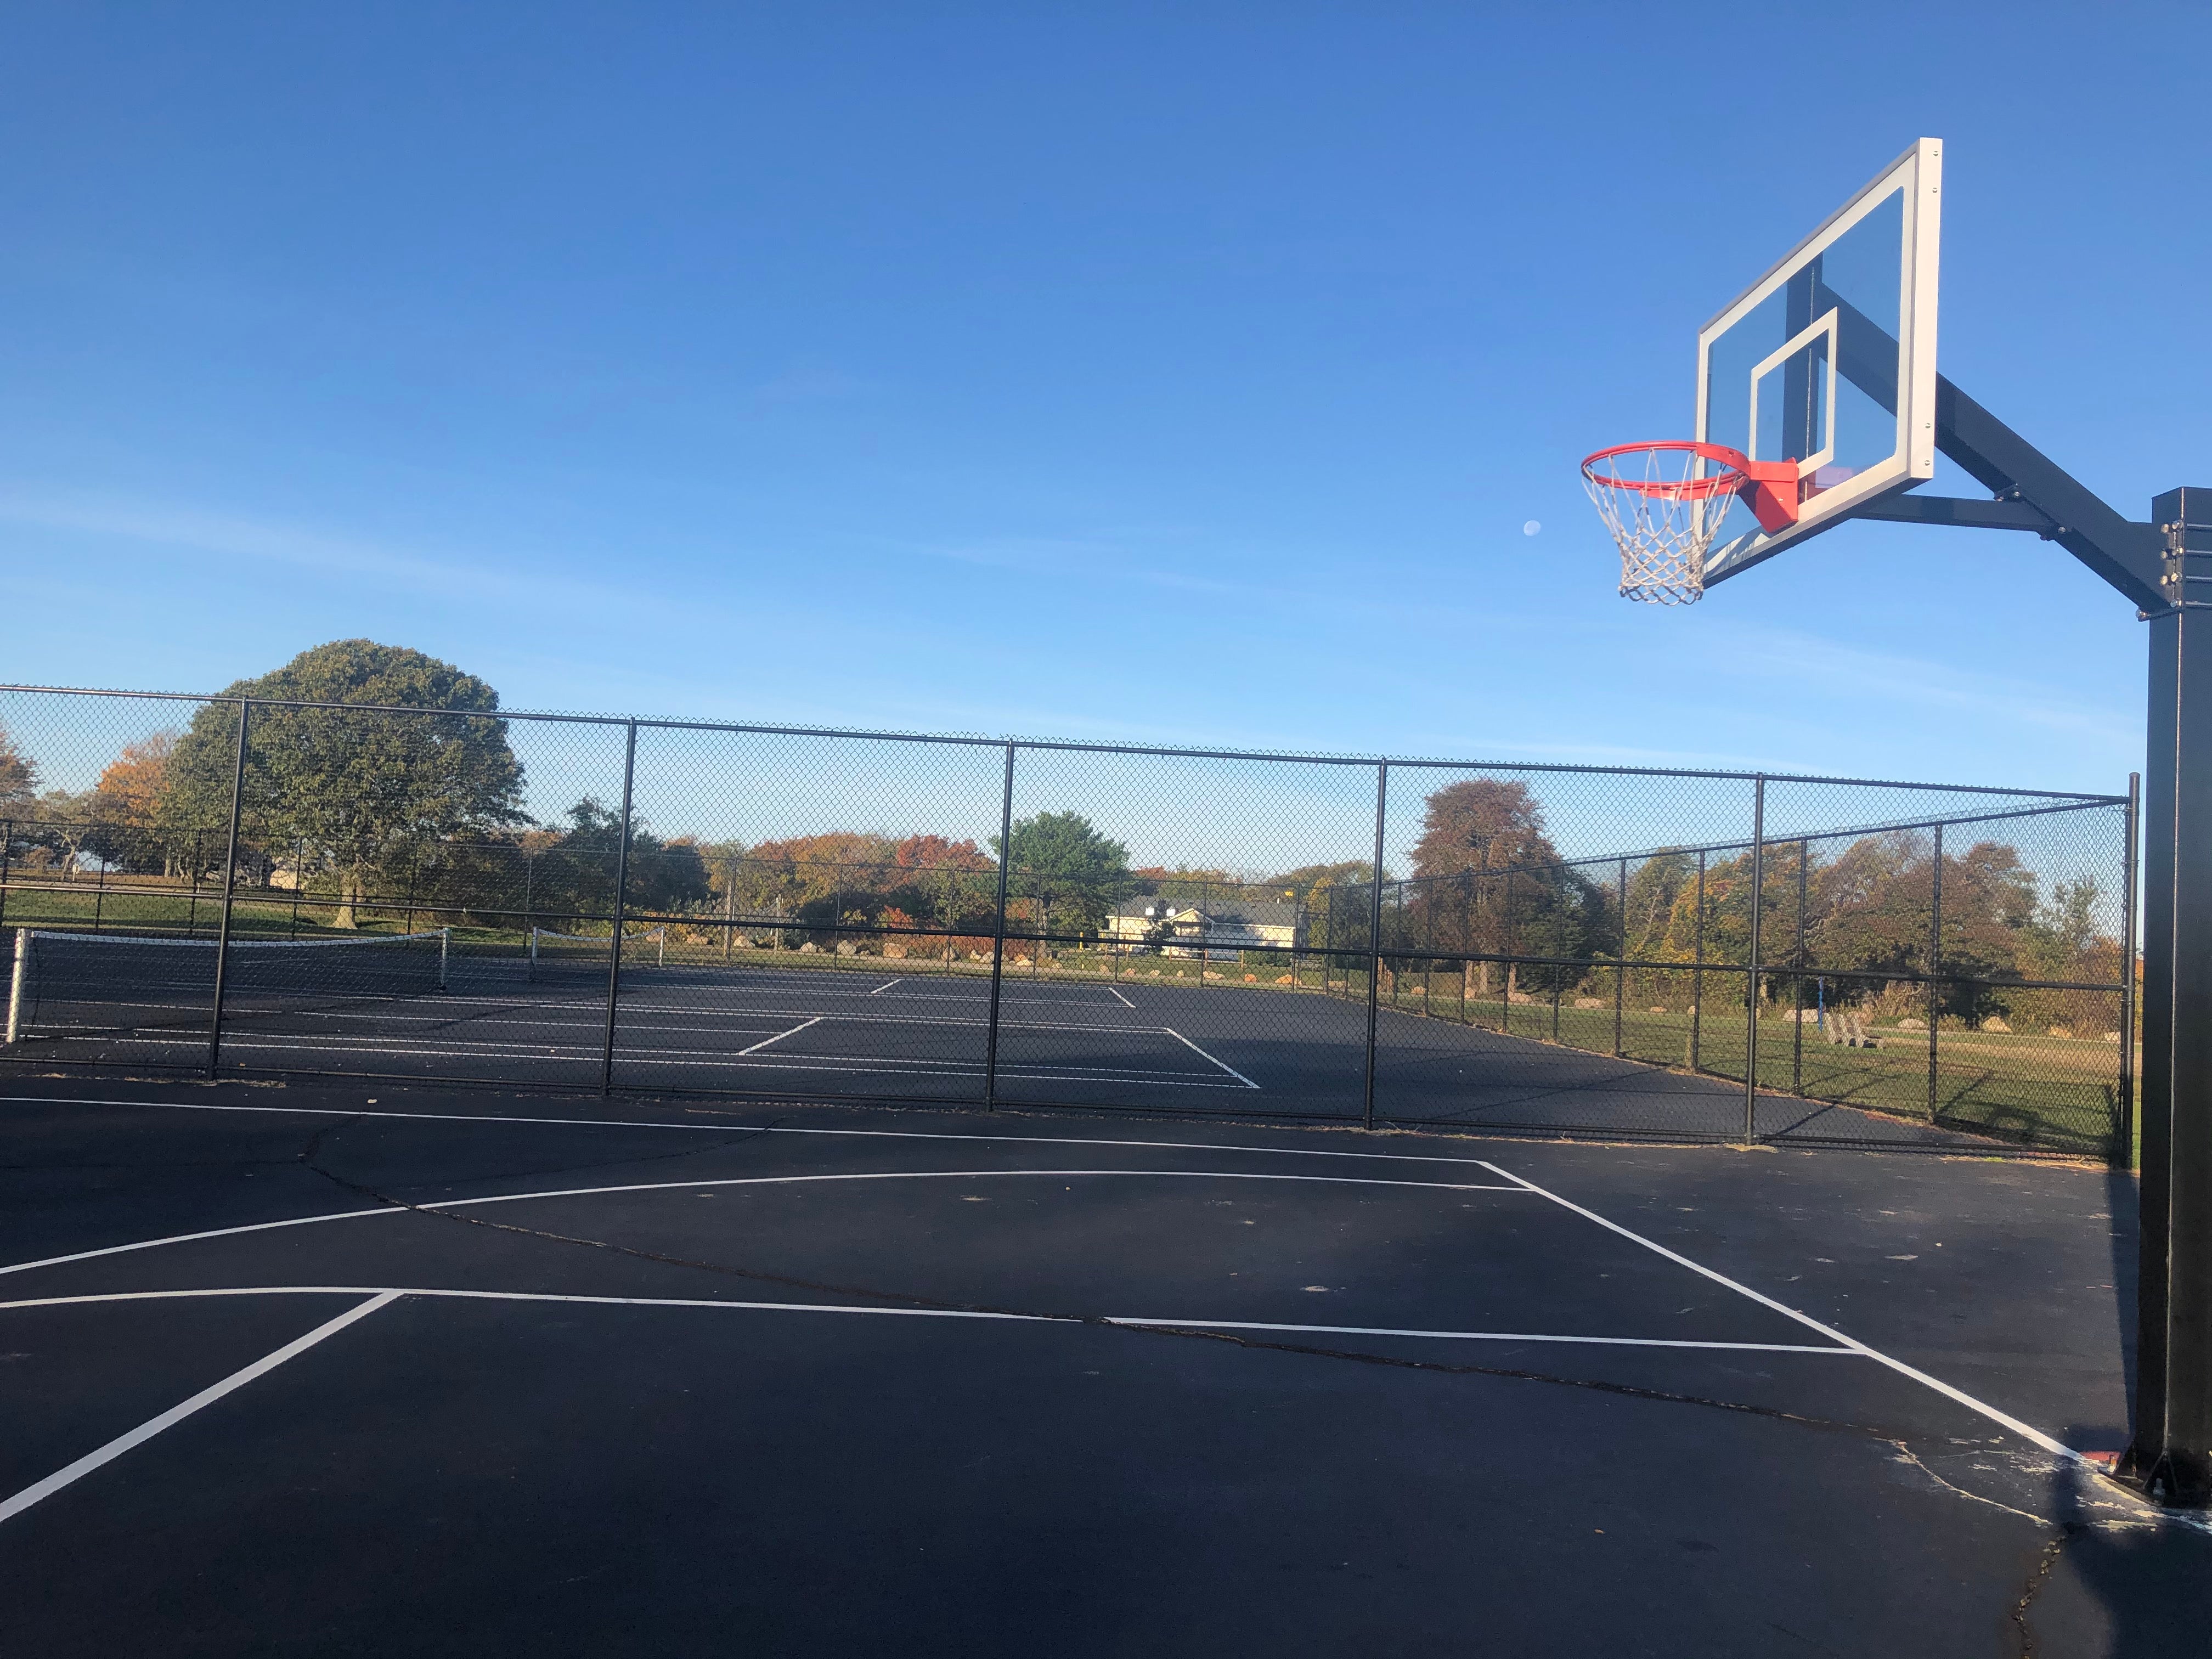 Many recreation options including basketball and tennis